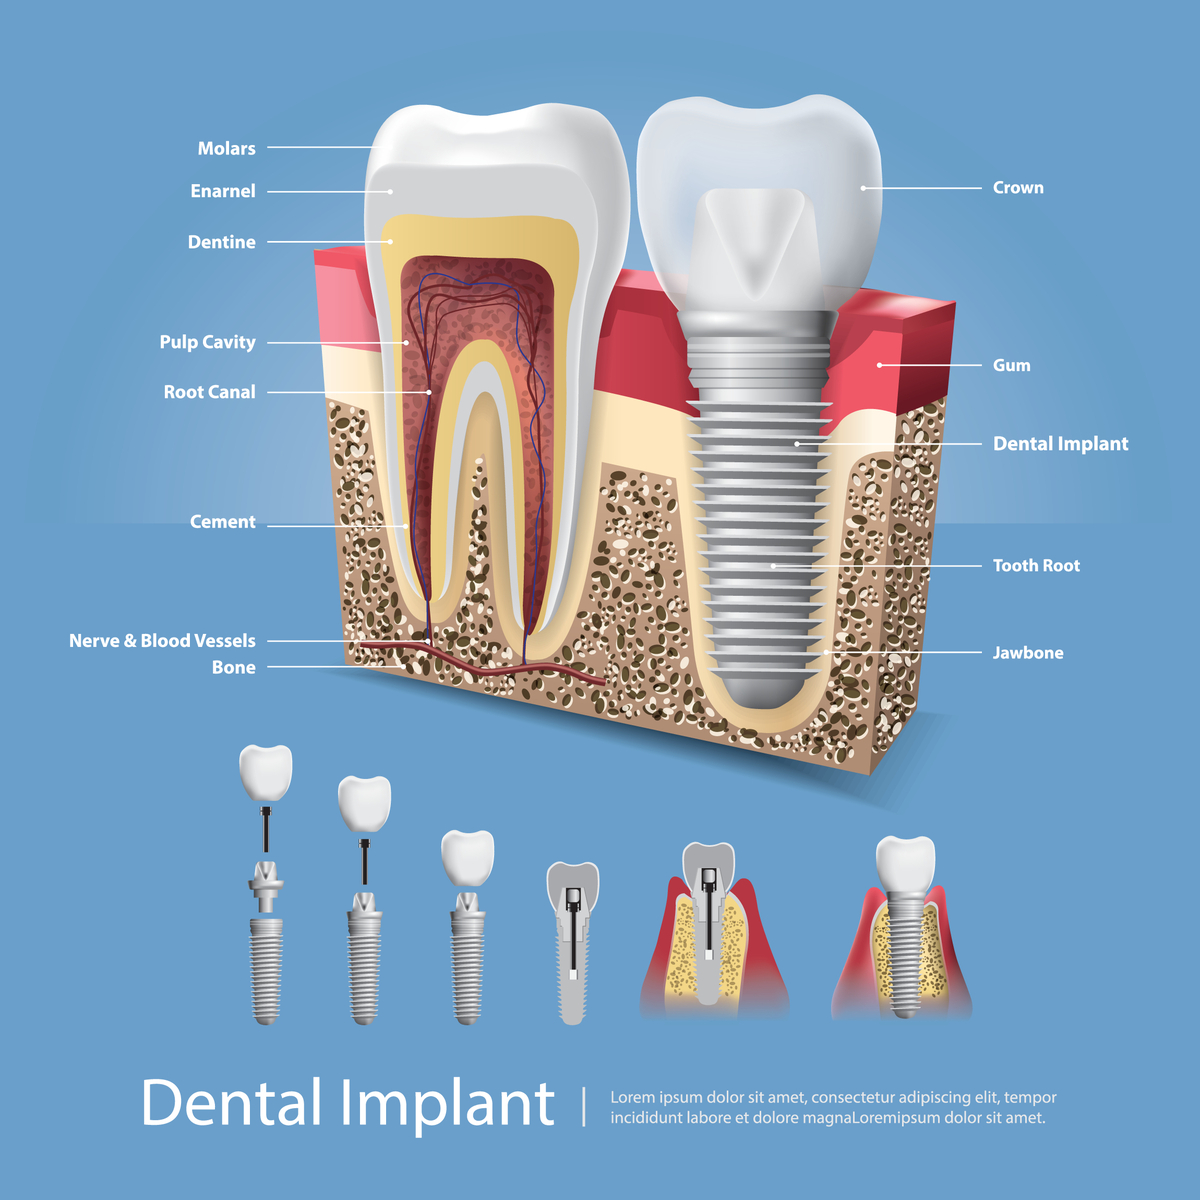 Dental Implant Riverview Gardens, MO | Tooth Pain | Restorative Dentistry | Cosmetic Dentistry Near Riverview Gardens, MO